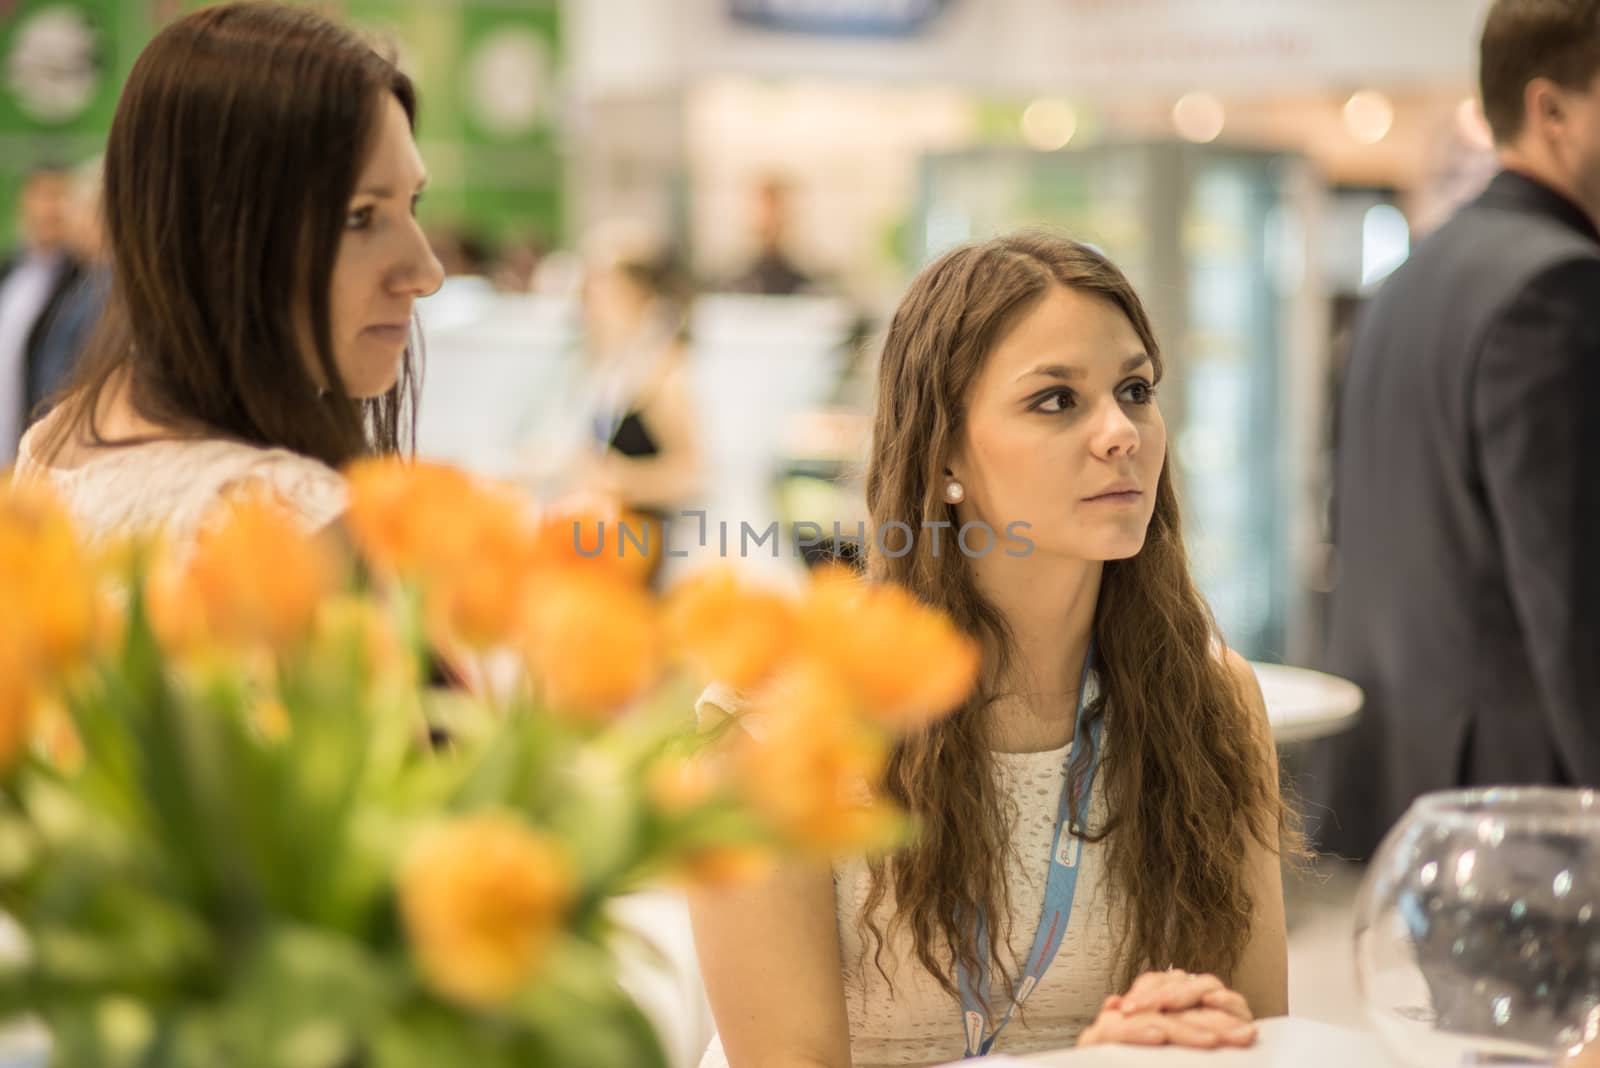 20/05/2018. Brno, Czech Republic. Two woman working as a receptionist at the convention trade center in Brno taking some time to have a coffee. BVV Brno Exhibition center. Czech Republic by gonzalobell